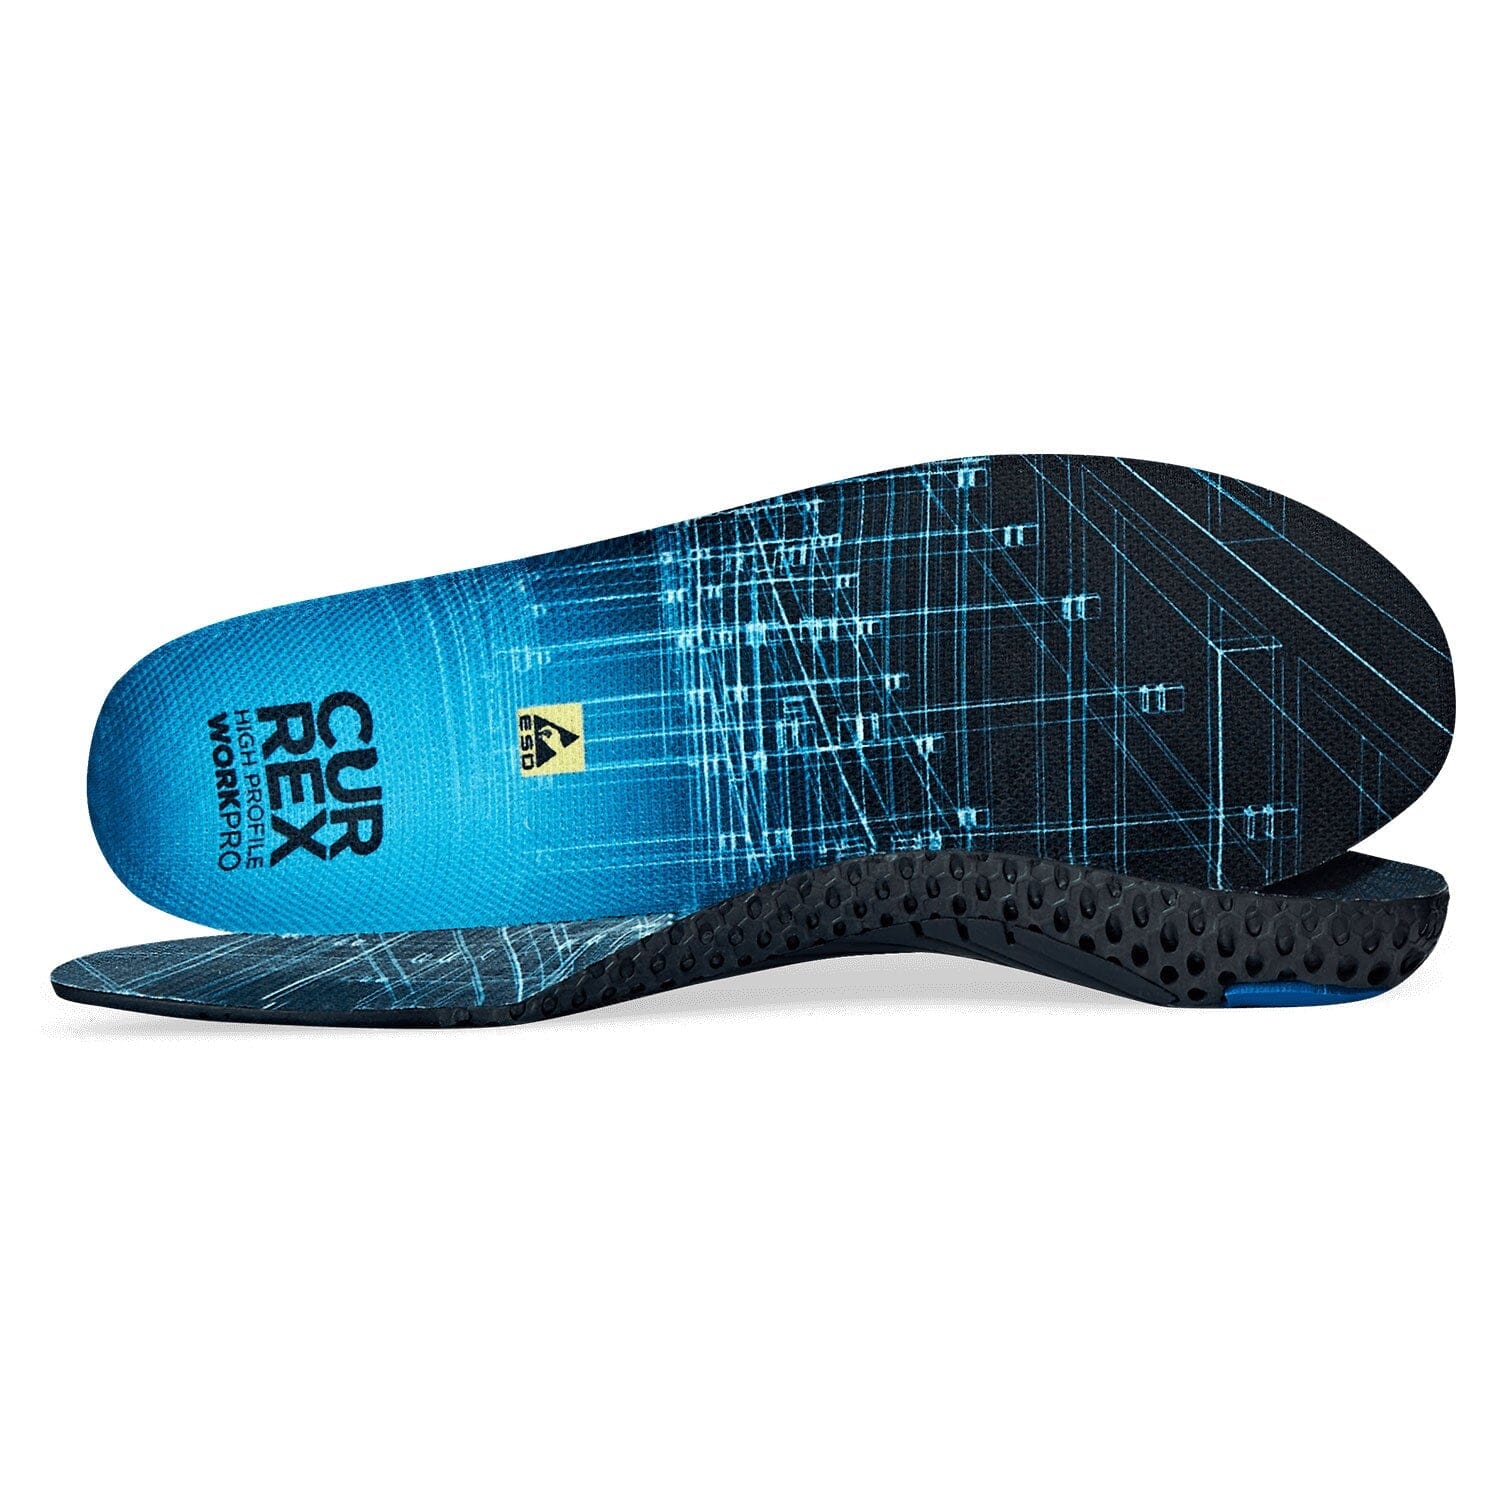 CURREX® WORKPRO™-ESD Insoles | Safety Insoles for Work Boots & Shoes High EU 34.5-36.5 